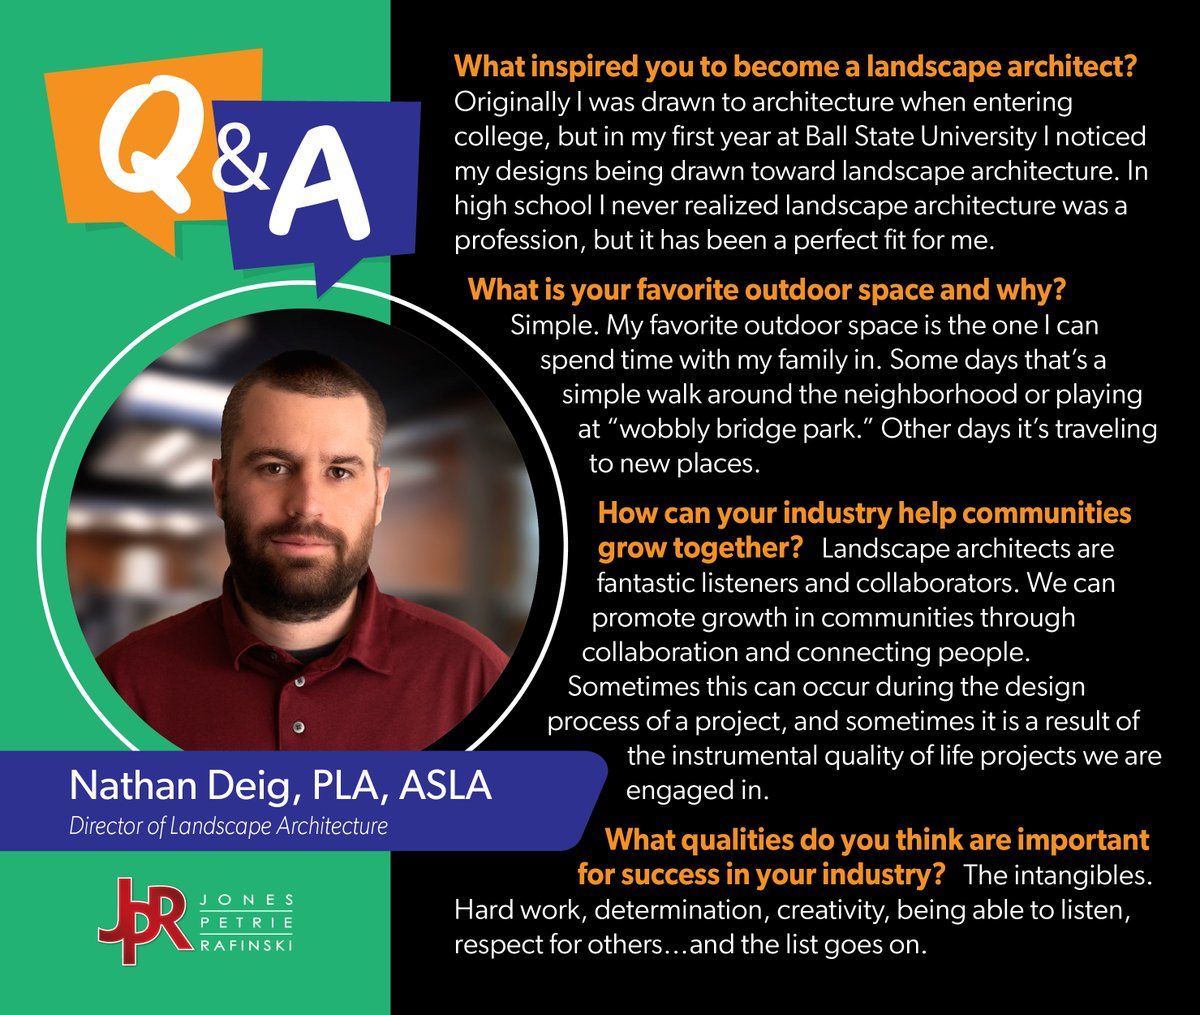 Meet Nathan. He was inspired to become a landscape architect at Ball State University, after he realized his designs leaned more toward landscape architecture. Turns out, it was a perfect fit! #WLAM2023 #LandscapeArchitect #JPR #GettingToKnowOurTeam